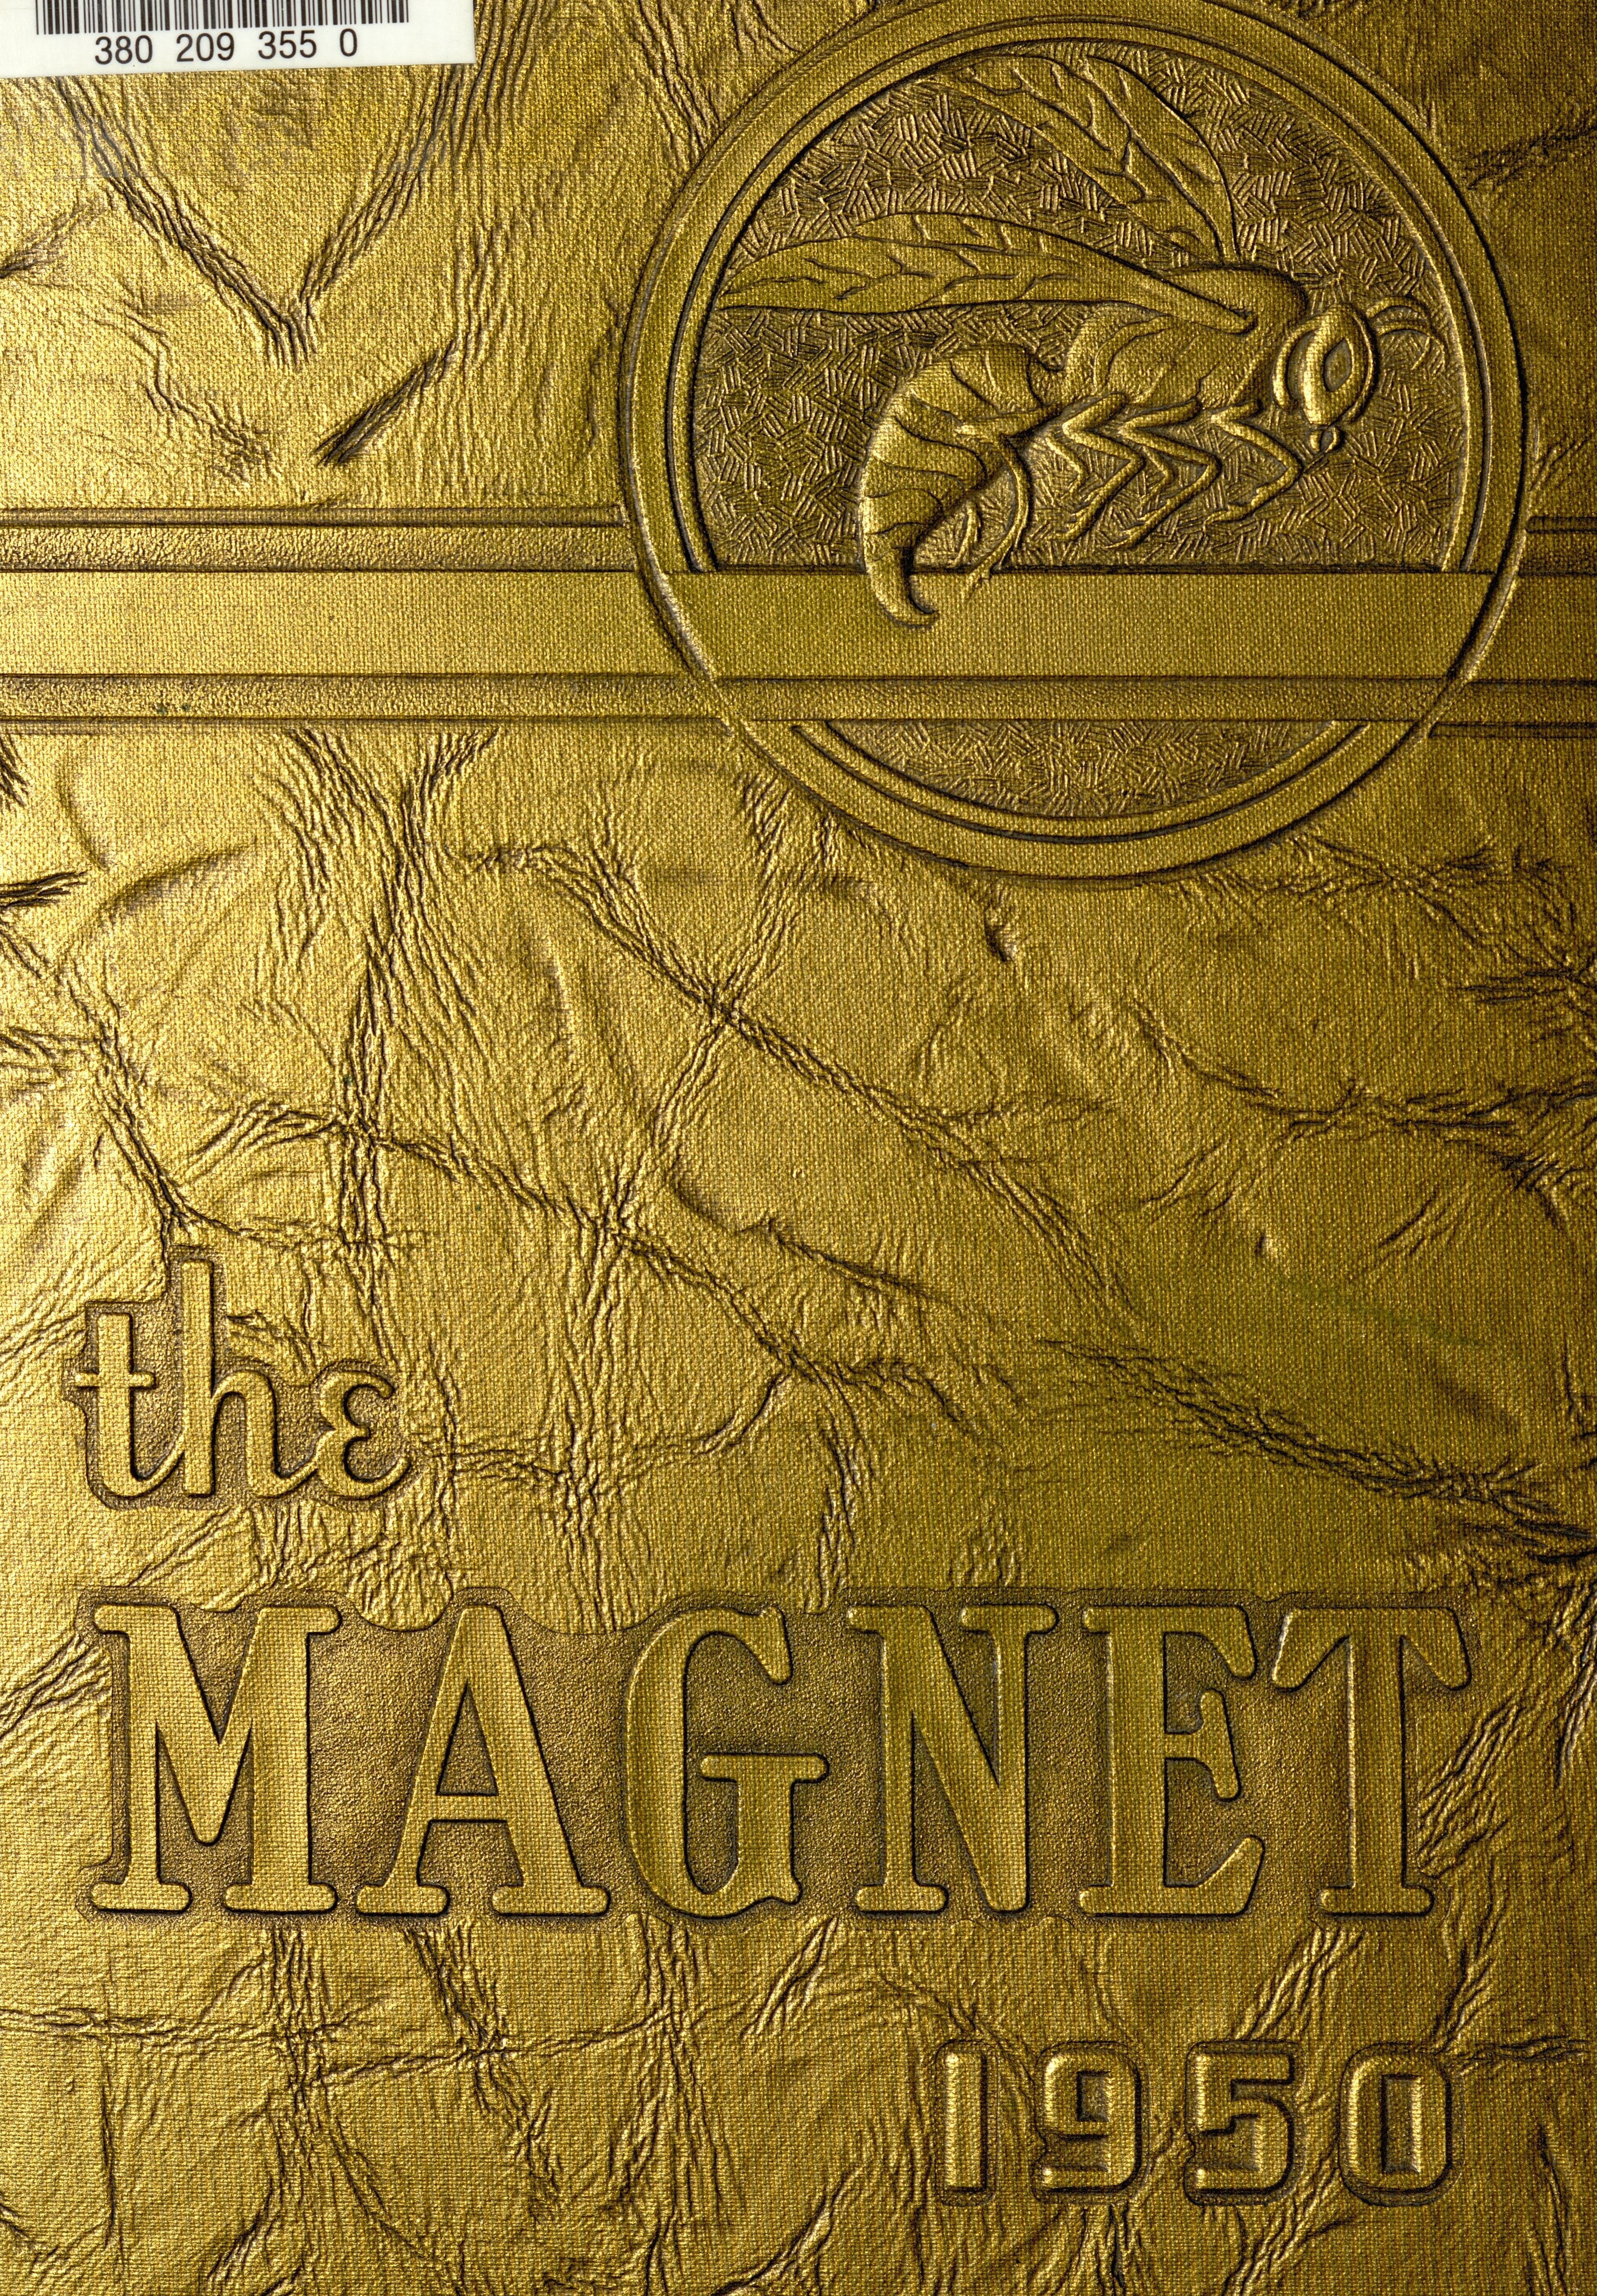 1950 Magnet Page Cover.jpg